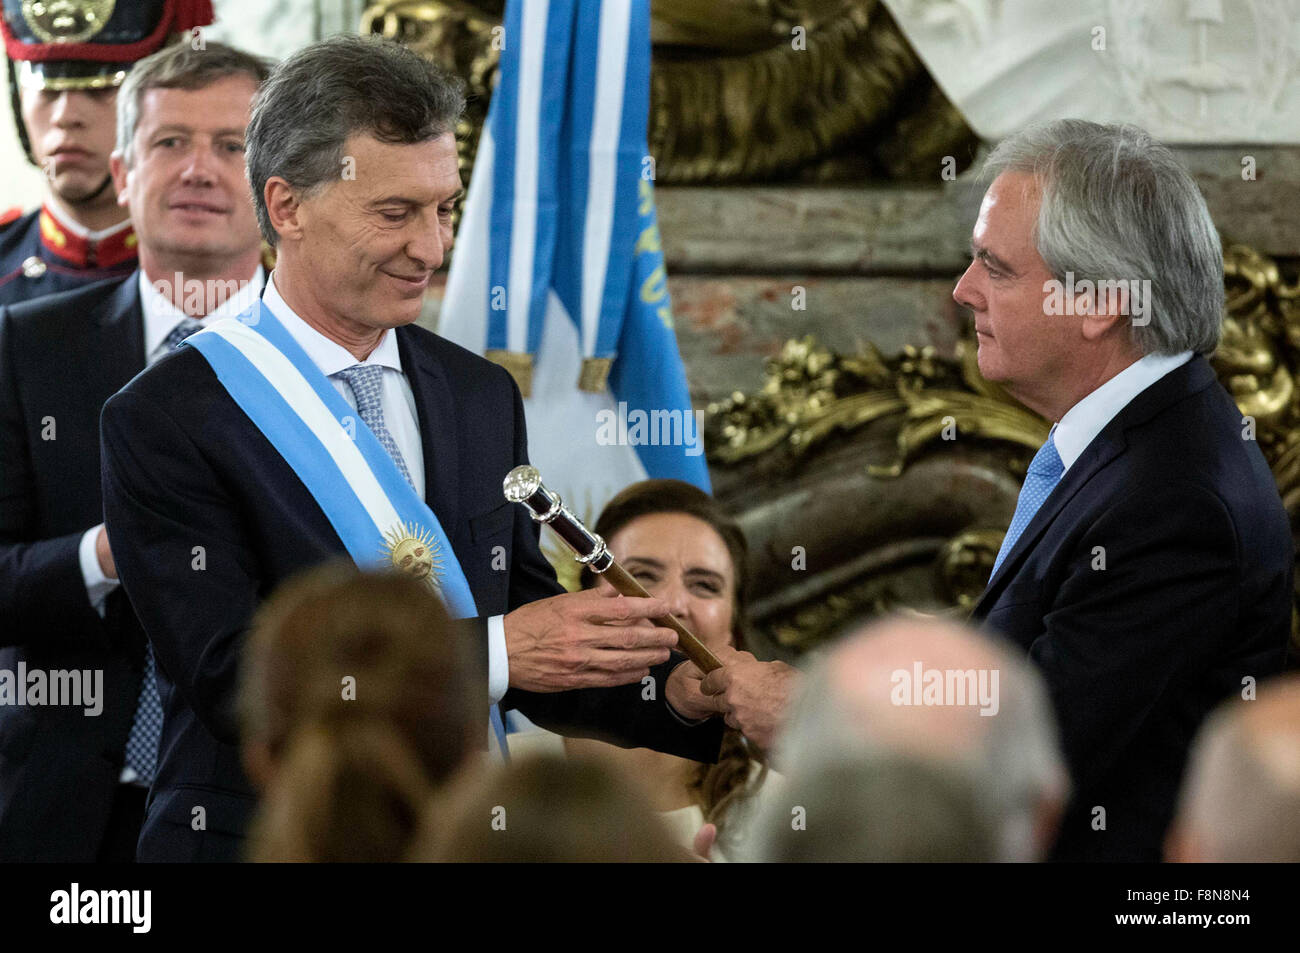 Buenos Aires, Argentina. 10th Dec, 2015. Argentina's new President Mauricio Macri (L) receives the presidential baton from the provisional President of the Argentine Senate Federico Pinedo (R) at White Room of Casa Rosada (Pink House) in Buenos Aires city, capital of Argentina, on Dec. 10, 2015. Mauricio Macri on Thursday inaugurated as new Argentine President, succeeding Cristina Fernandez. Credit:  Martin Zabala/Xinhua/Alamy Live News Stock Photo